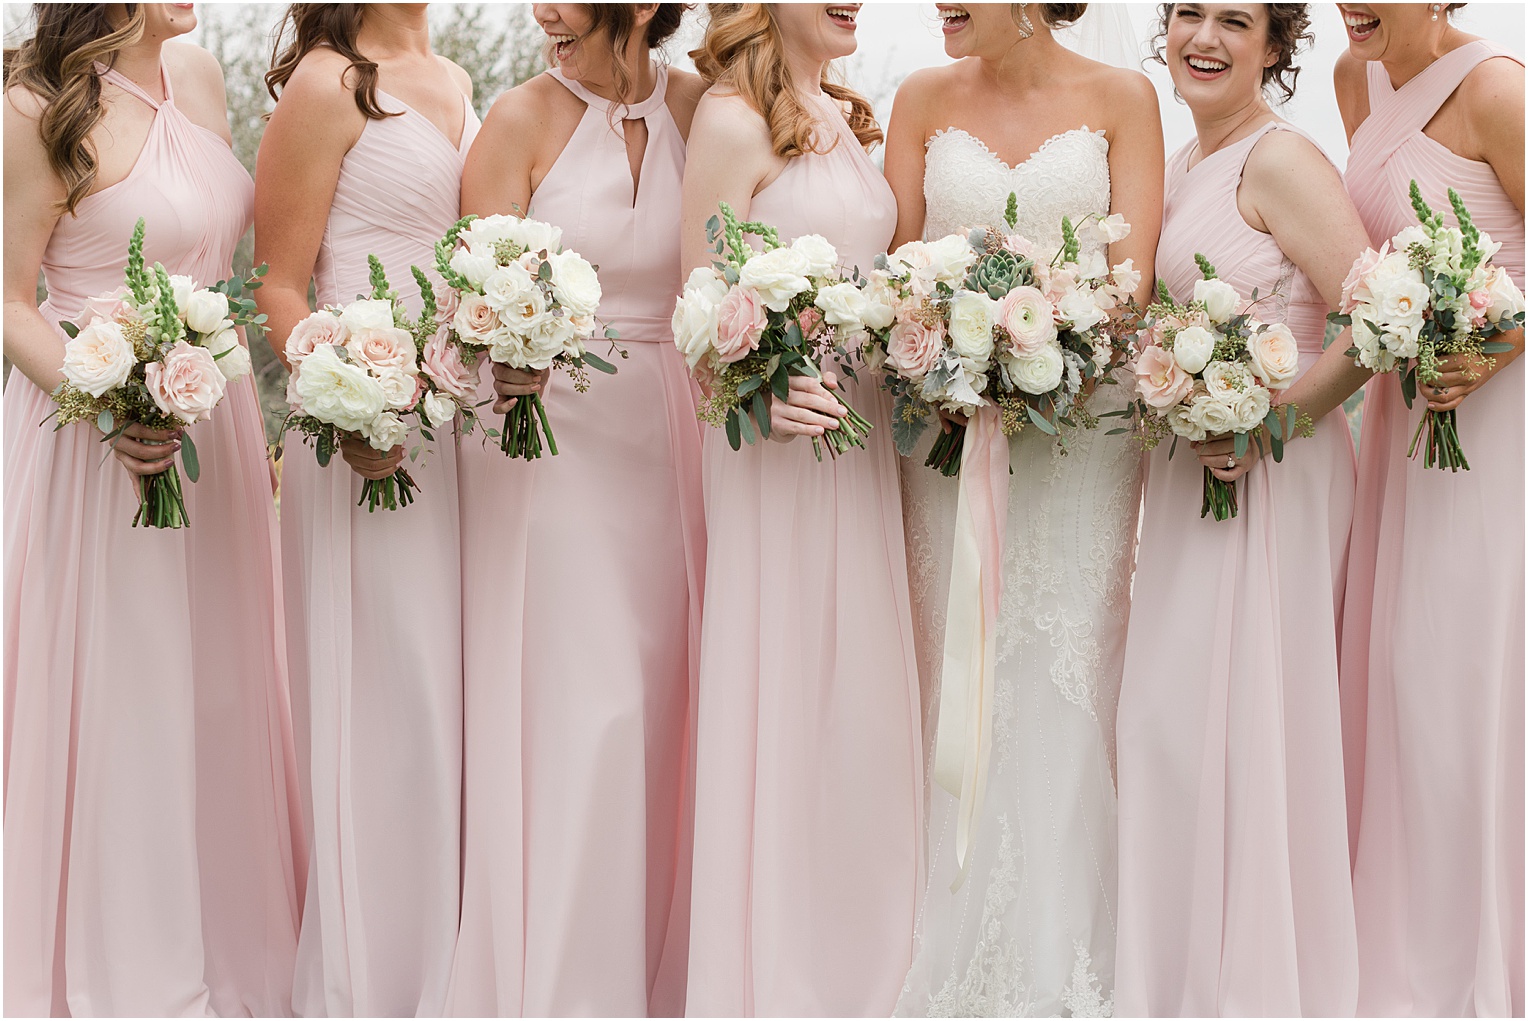 Highlands at Dove Mountain Wedding Grace + Danny bridesmaids with romantic blush and ivory bouquet with succulents